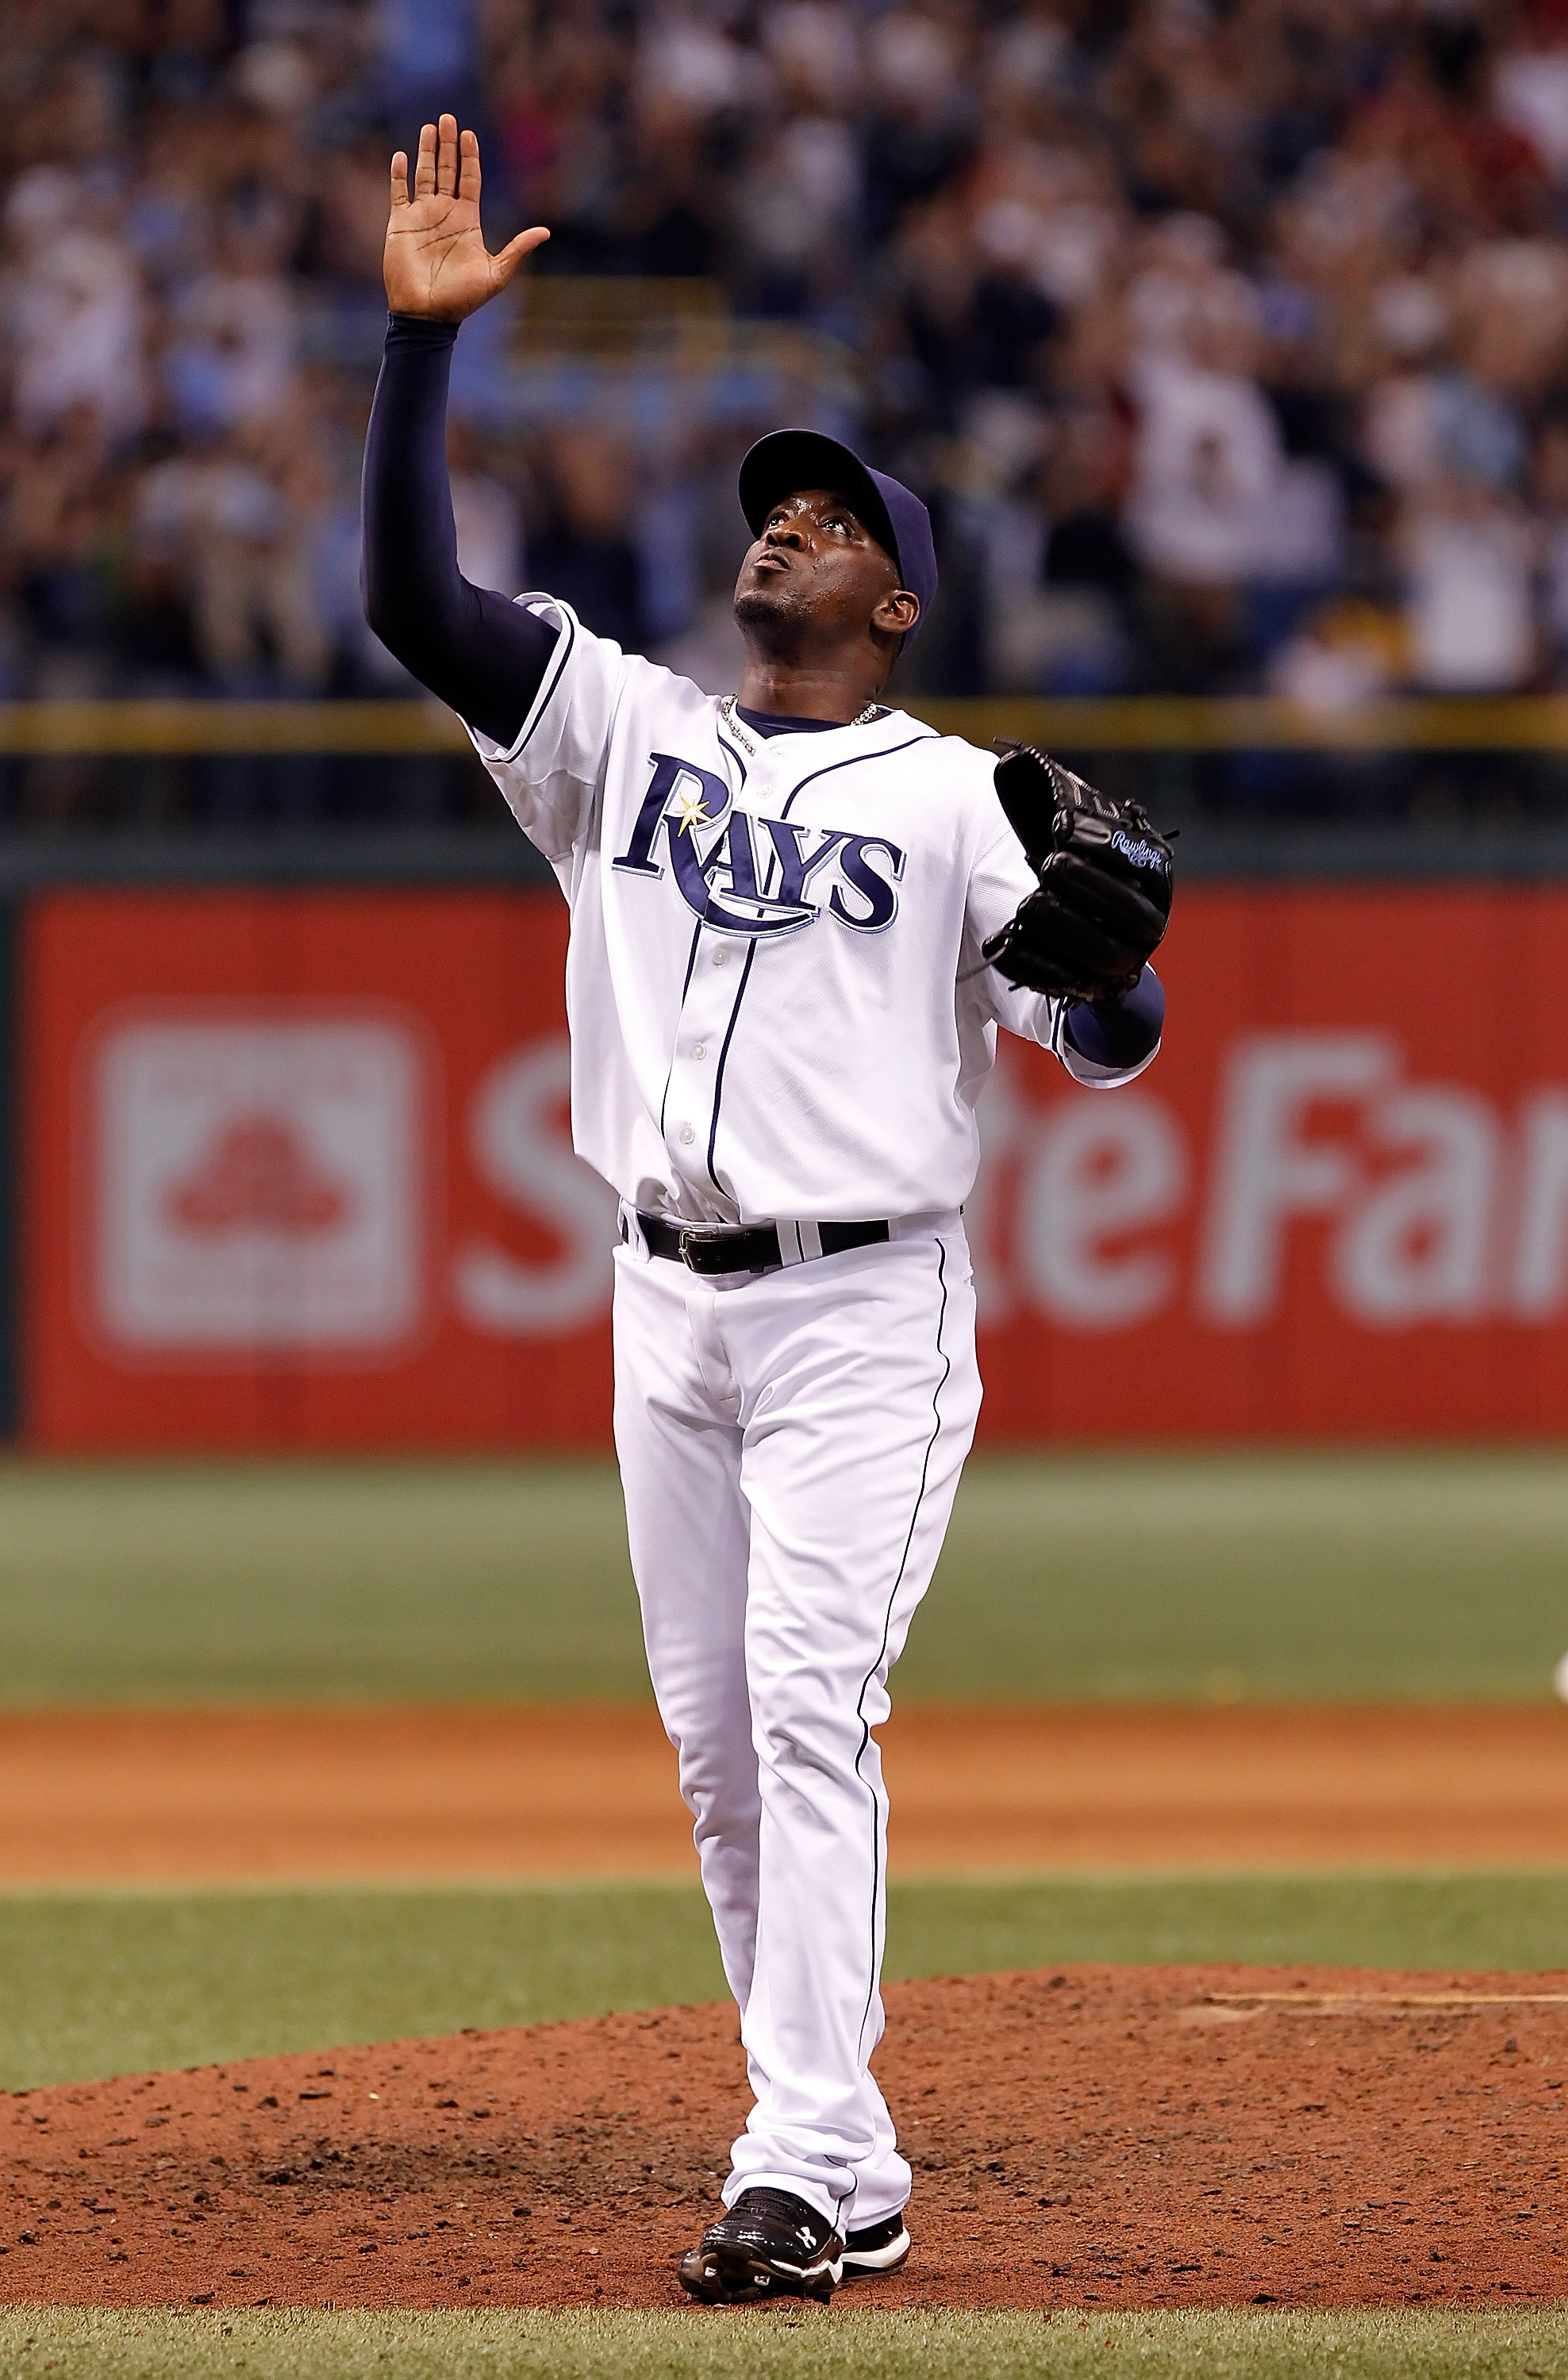 ST. PETERSBURG, FL - SEPTEMBER 15:  Relief pitcher Rafael Soriano #29 of the Tampa Bay Rays celebrates his save against the New York Yankees at Tropicana Field on September 15, 2010 in St. Petersburg, Florida.  (Photo by J. Meric/Getty Images)